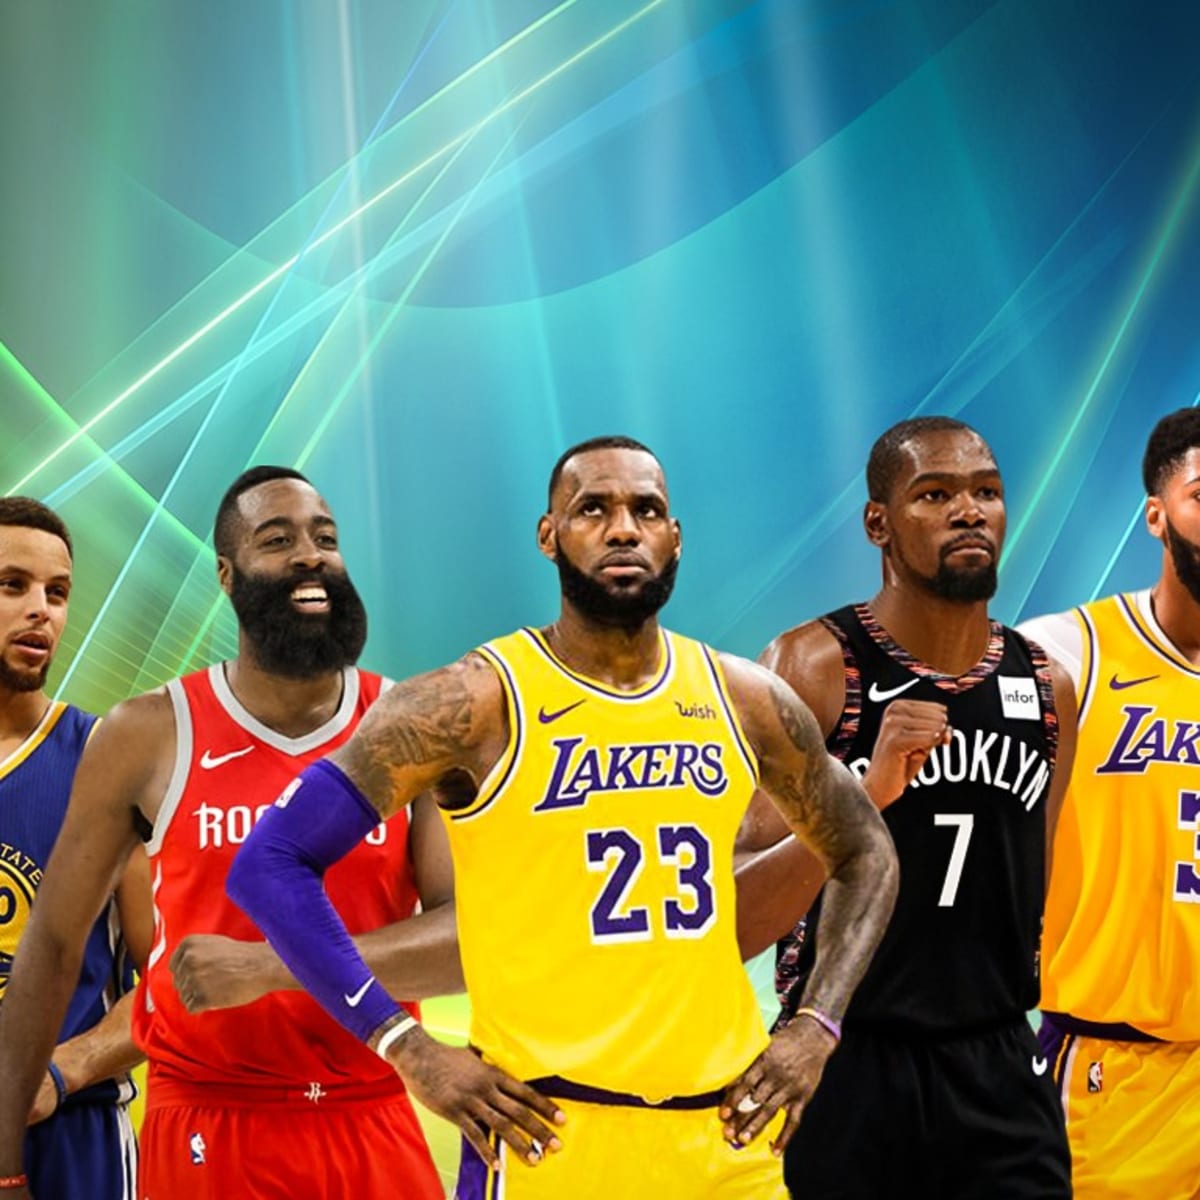 ESPN's All Decade Team: Stephen Curry, James Harden, LeBron James, Kevin Durant And Anthony Davis